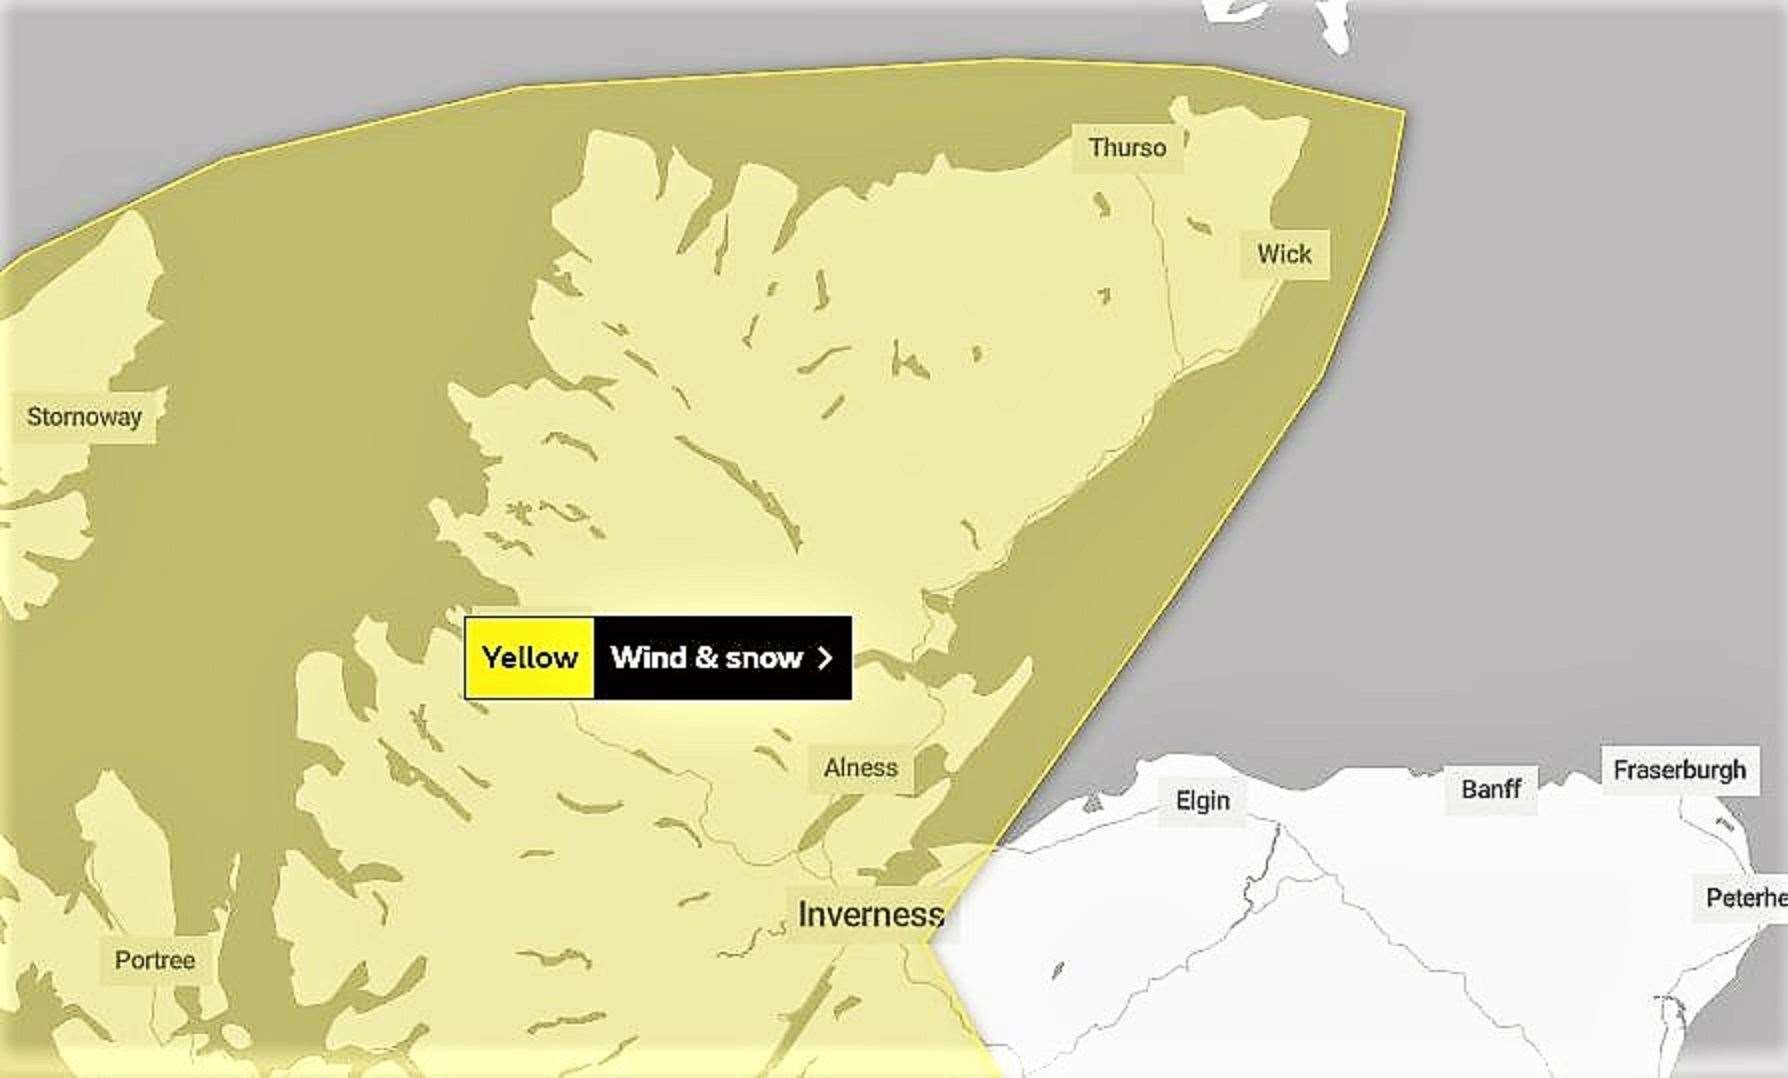 Met Office map issued for Yellow Warning of snow and wind in the far north over Wednesday and Thursday.